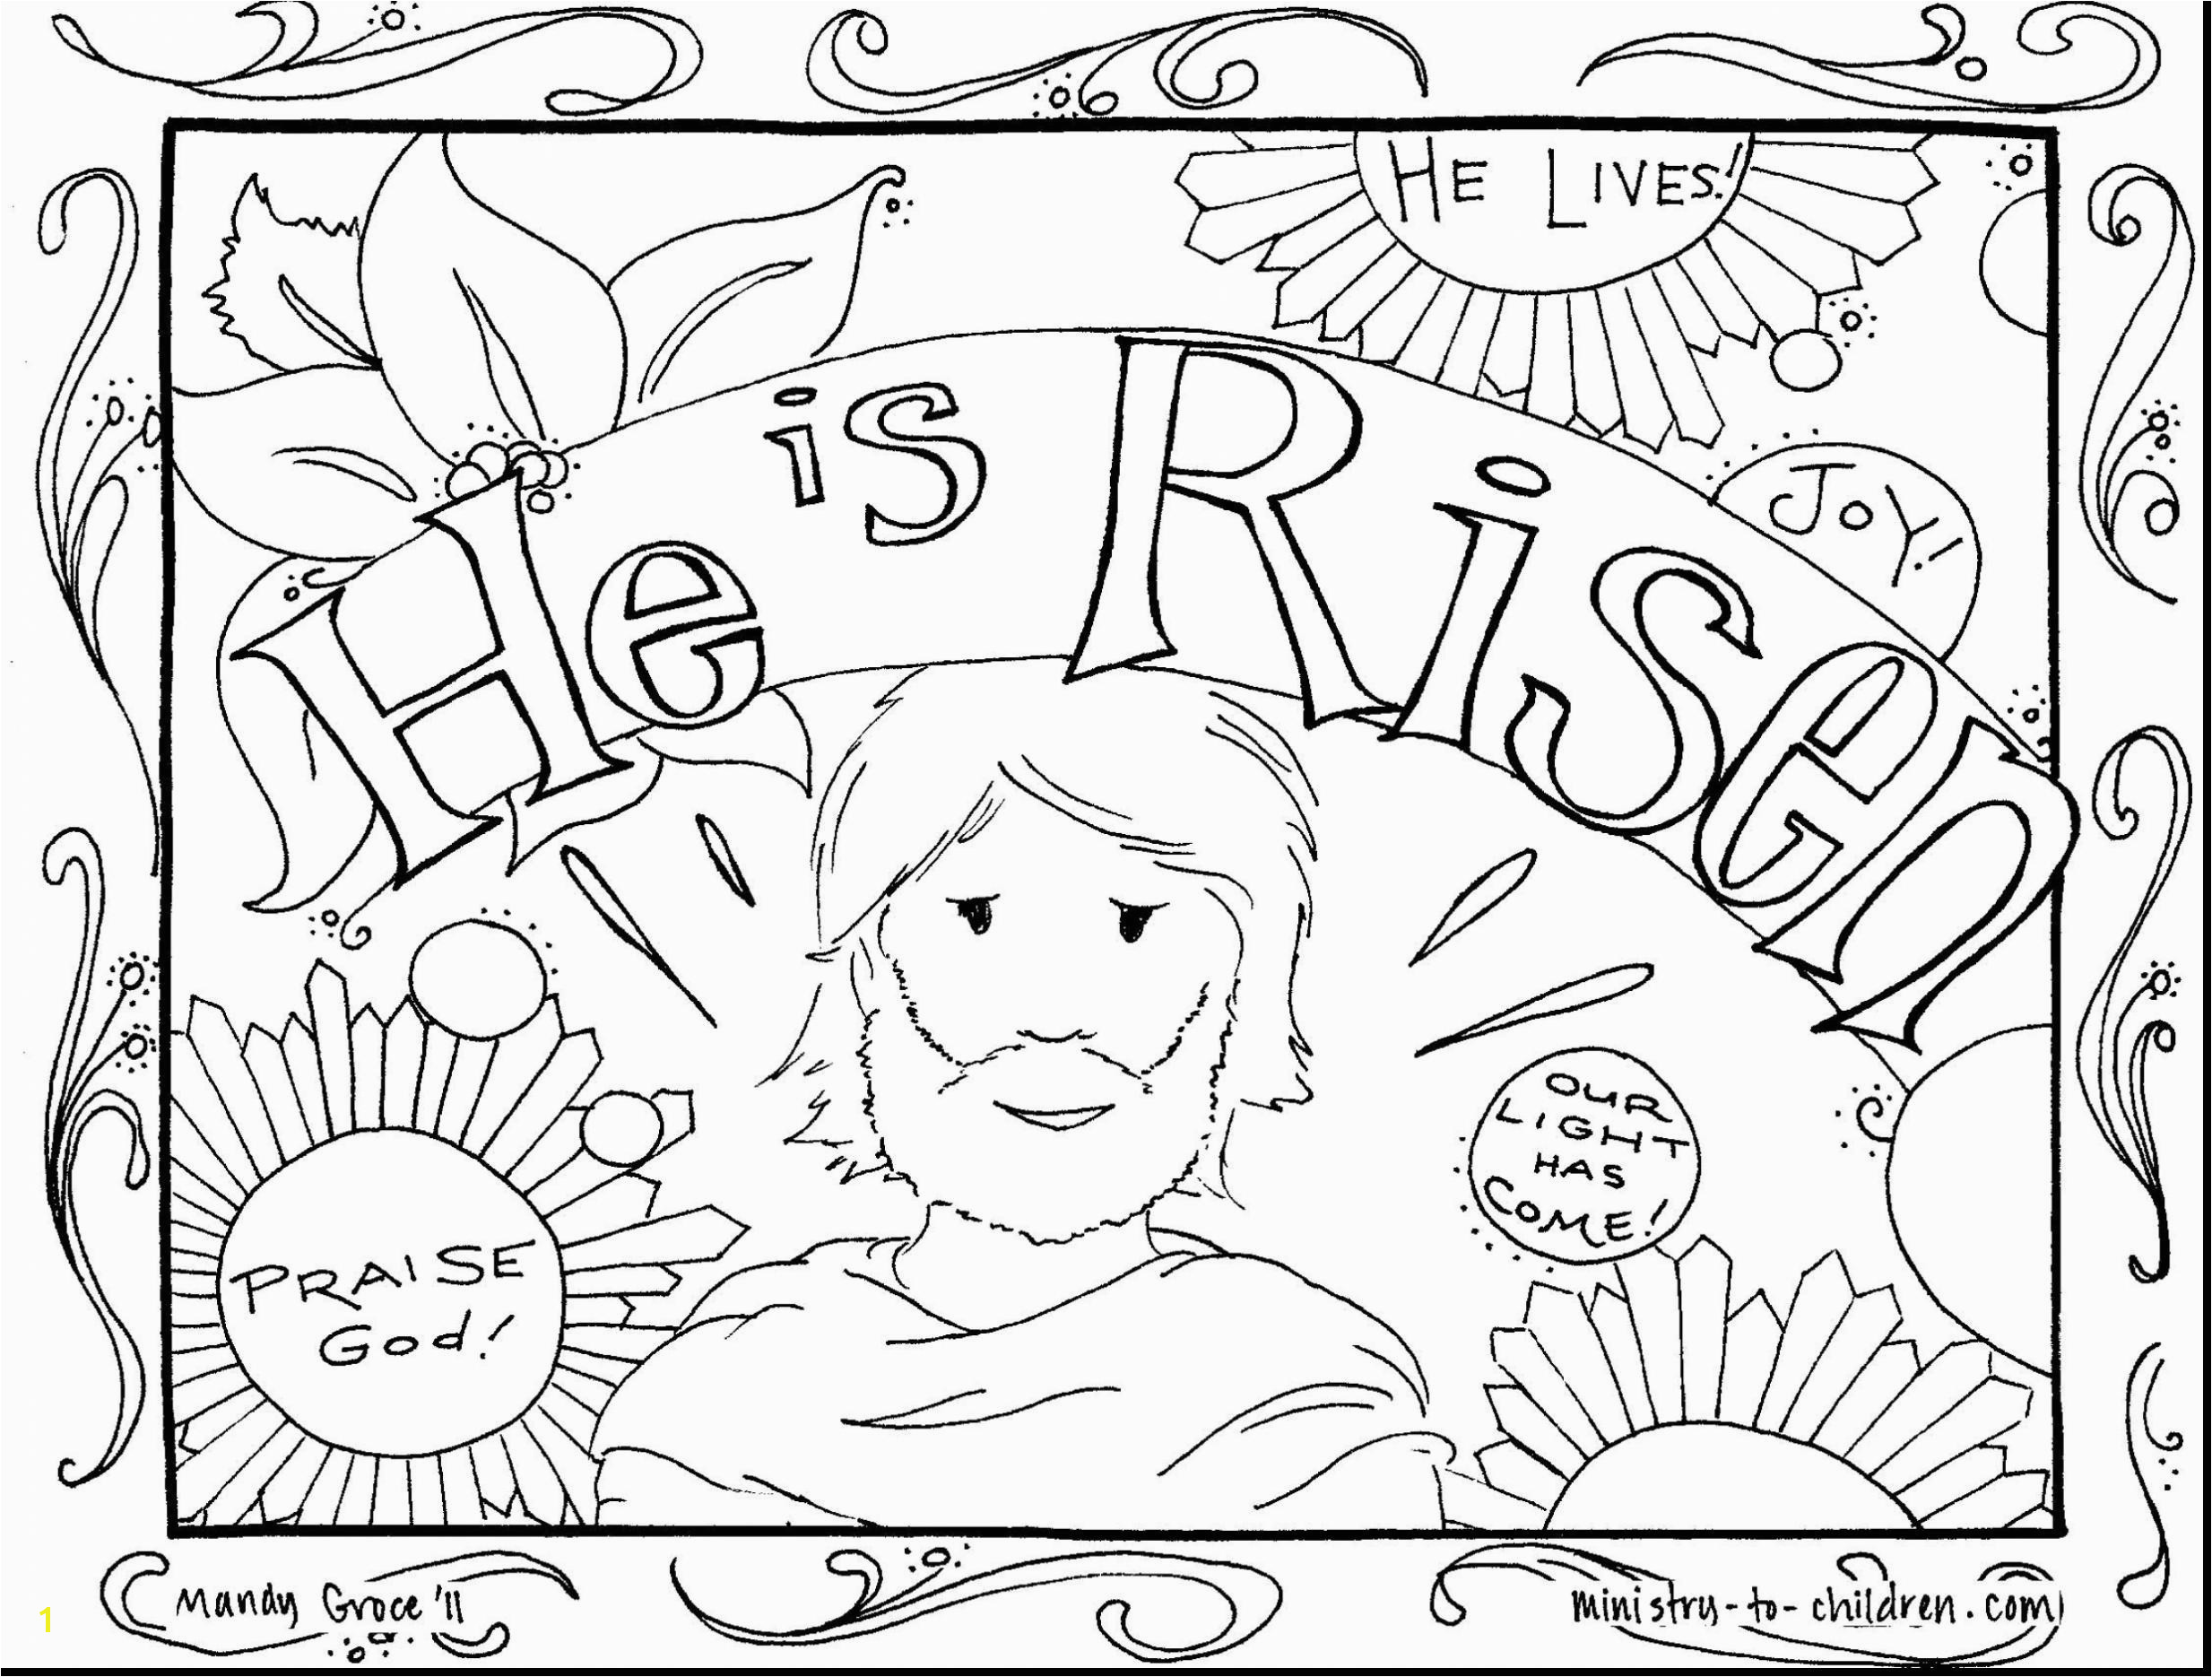 Four Friends Help A Paralyzed Man Coloring Pages Colorful Jesus Heals Paralyzed Man Coloring Page Gallery